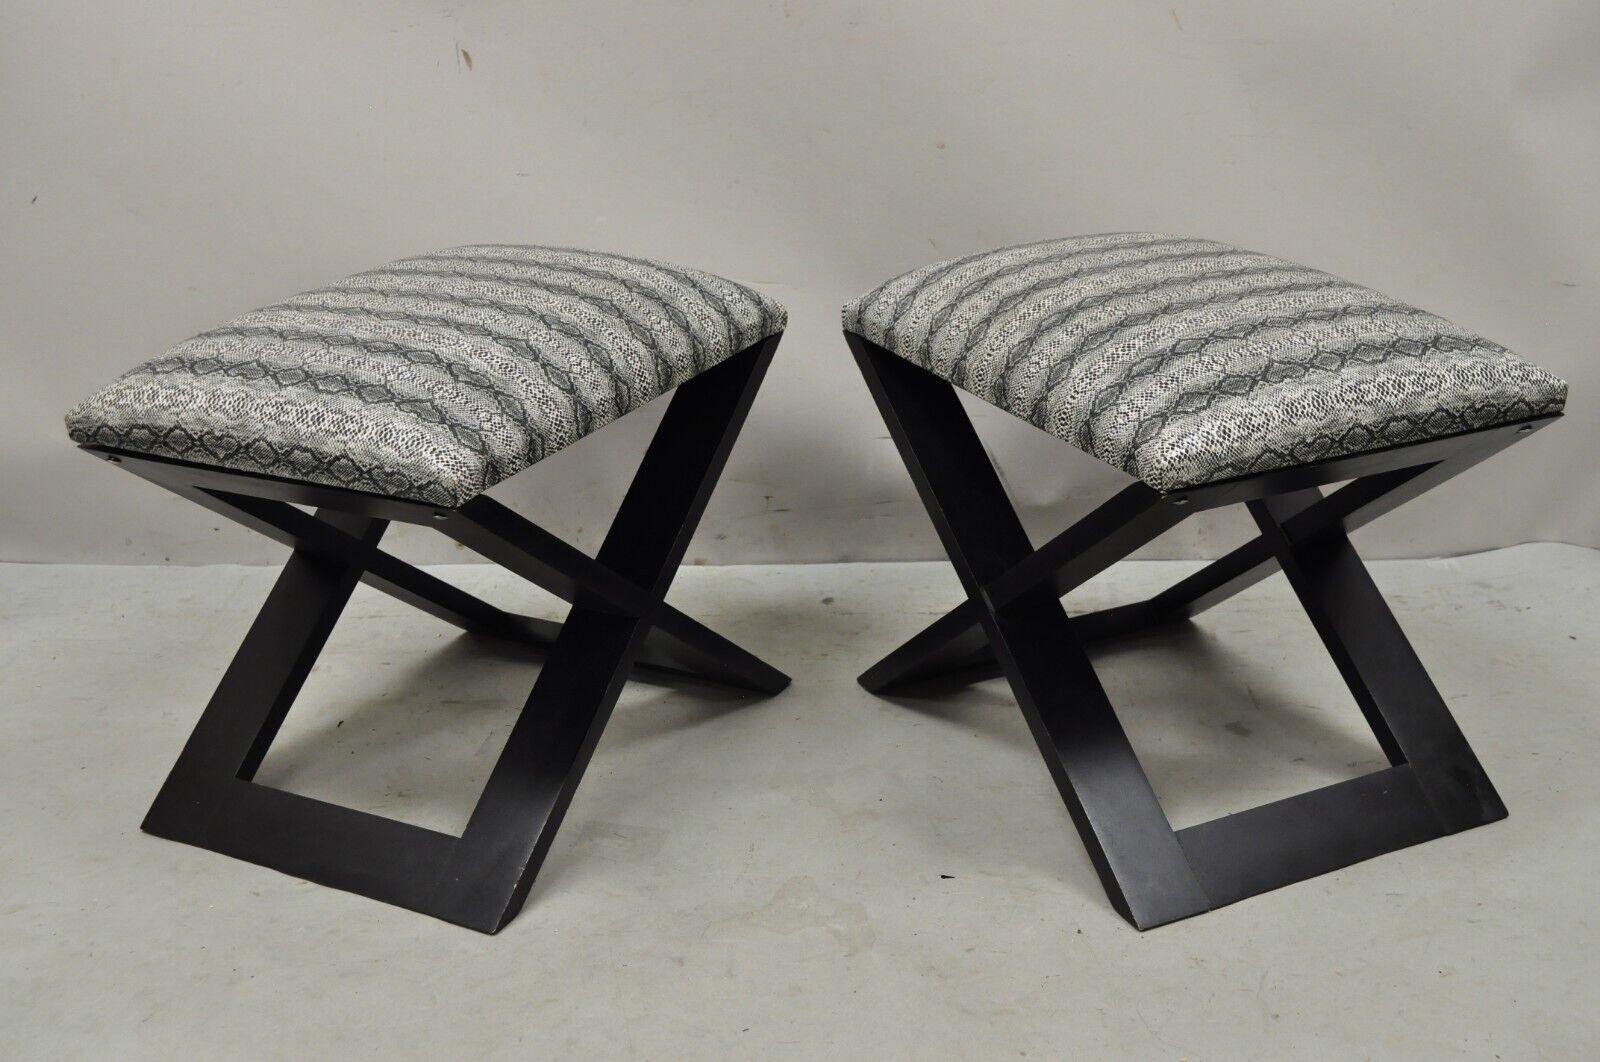 Hollywood Regency style black x-frame stools snakeskin upholstery - a pair. Item features black vinyl snakeskin upholstery, black painted finish, solid wood frame, clean modernist lines, great style and form. Circa late 20th to early 21st century.